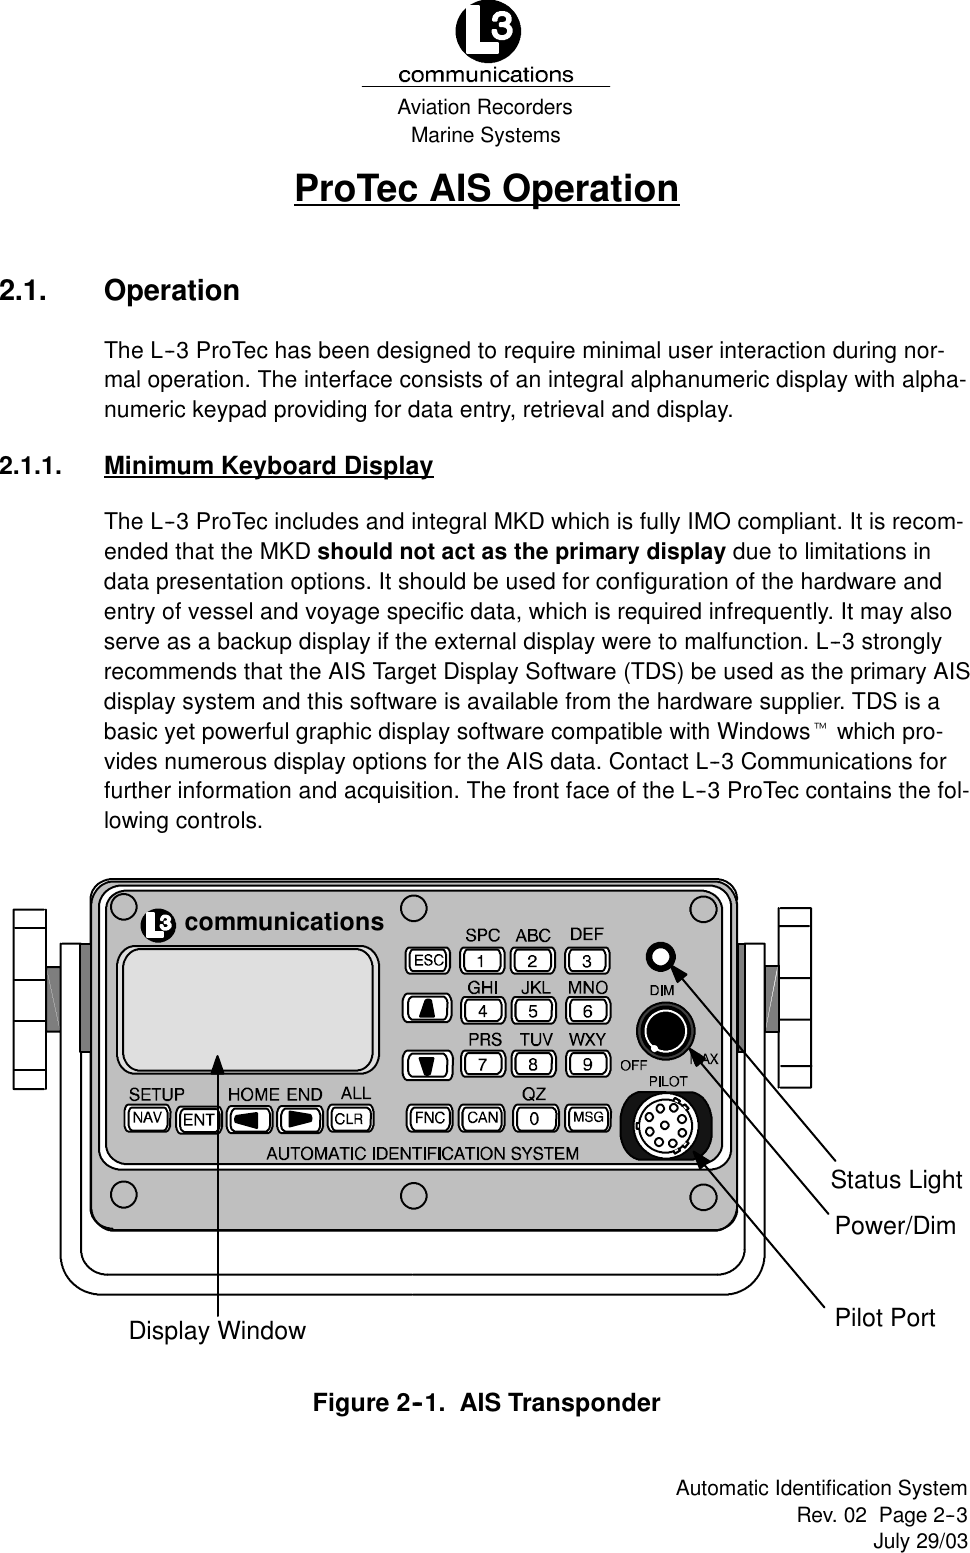 Marine SystemsAviation RecordersRev. 02 Page 2--3July 29/03Automatic Identification SystemProTec AIS Operation2.1. OperationThe L--3 ProTec has been designed to require minimal user interaction during nor-mal operation. The interface consists of an integral alphanumeric display with alpha-numeric keypad providing for data entry, retrieval and display.2.1.1. Minimum Keyboard DisplayThe L--3 ProTec includes and integral MKD which is fully IMO compliant. It is recom-ended that the MKD should not act as the primary display due to limitations indata presentation options. It should be used for configuration of the hardware andentry of vessel and voyage specific data, which is required infrequently. It may alsoserve as a backup display if the external display were to malfunction. L--3 stronglyrecommends that the AIS Target Display Software (TDS) be used as the primary AISdisplay system and this software is available from the hardware supplier. TDS is abasic yet powerful graphic display software compatible with Windowstwhich pro-vides numerous display options for the AIS data. Contact L--3 Communications forfurther information and acquisition. The front face of the L--3 ProTec contains the fol-lowing controls.communicationsPower/DimStatus LightPilot PortDisplay WindowFigure 2--1. AIS Transponder